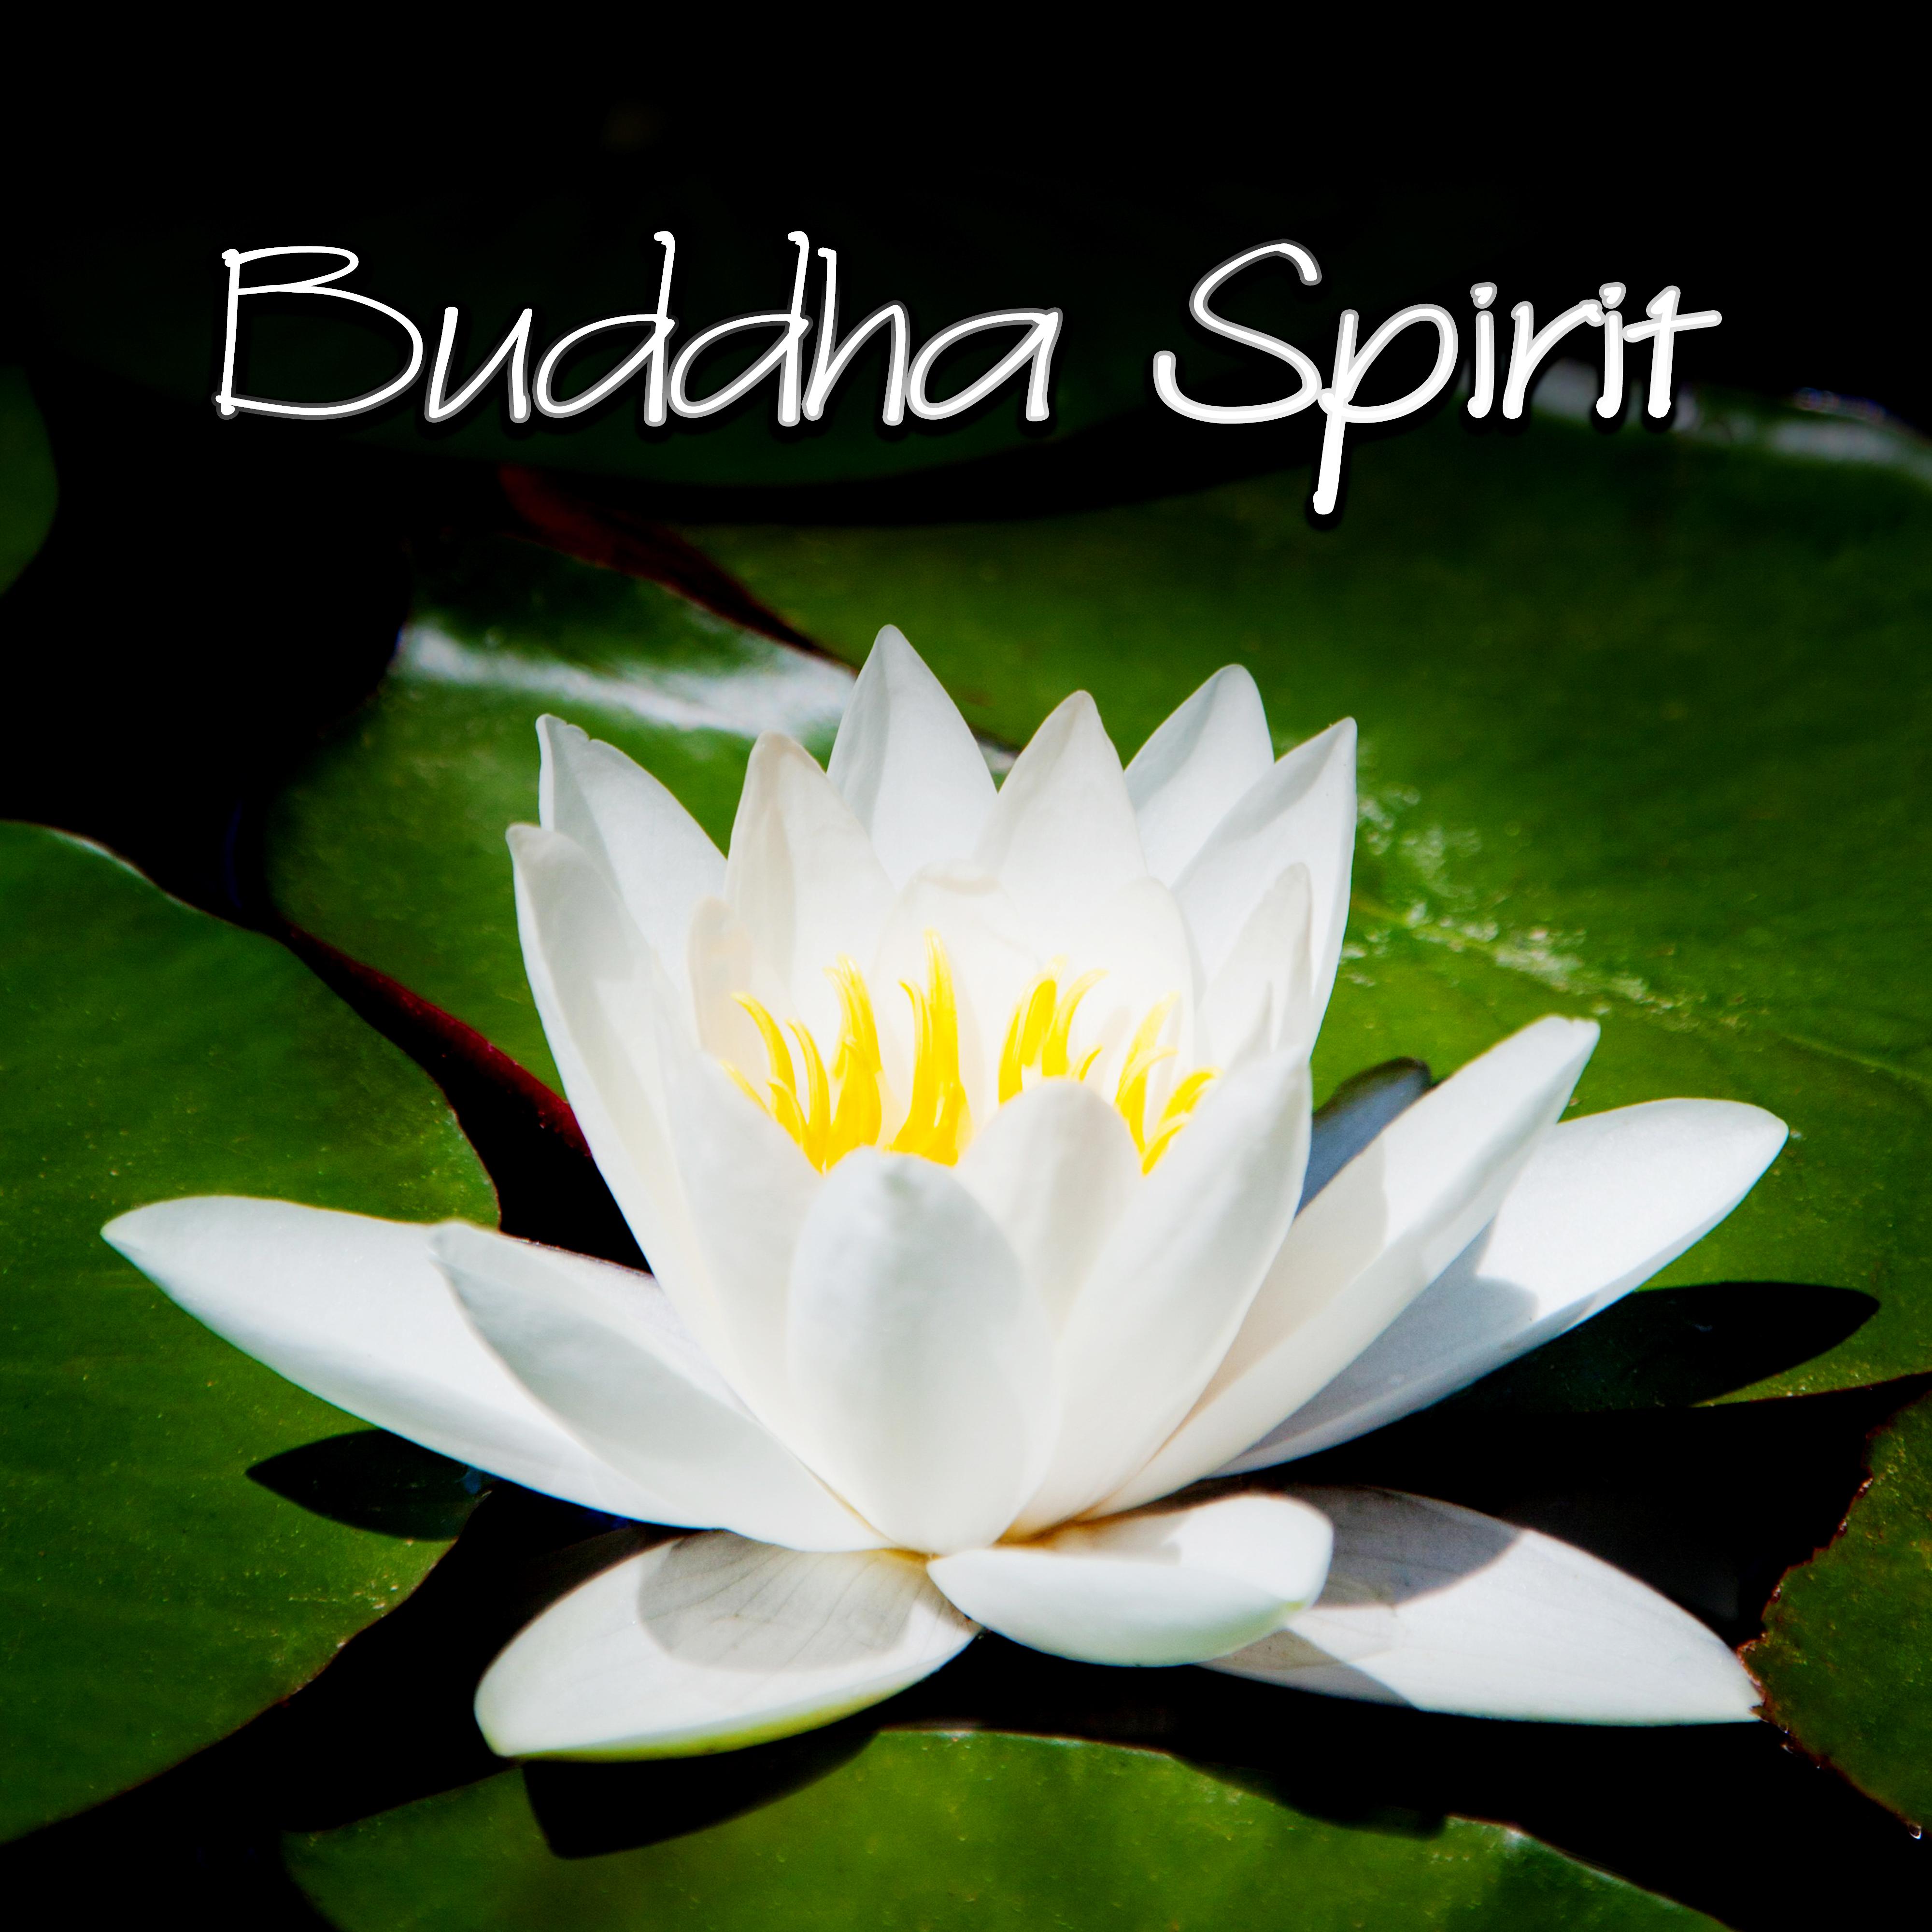 Buddha Spirit - Cafe Buddha Relaxation, Ambient Yoga, Tantra Spirit Meditation, Bar Chill Out Lounge, Asia Relax Edition, Sleep, Spa, Inner Peace, Waves of Calmness & Sounds of Nature